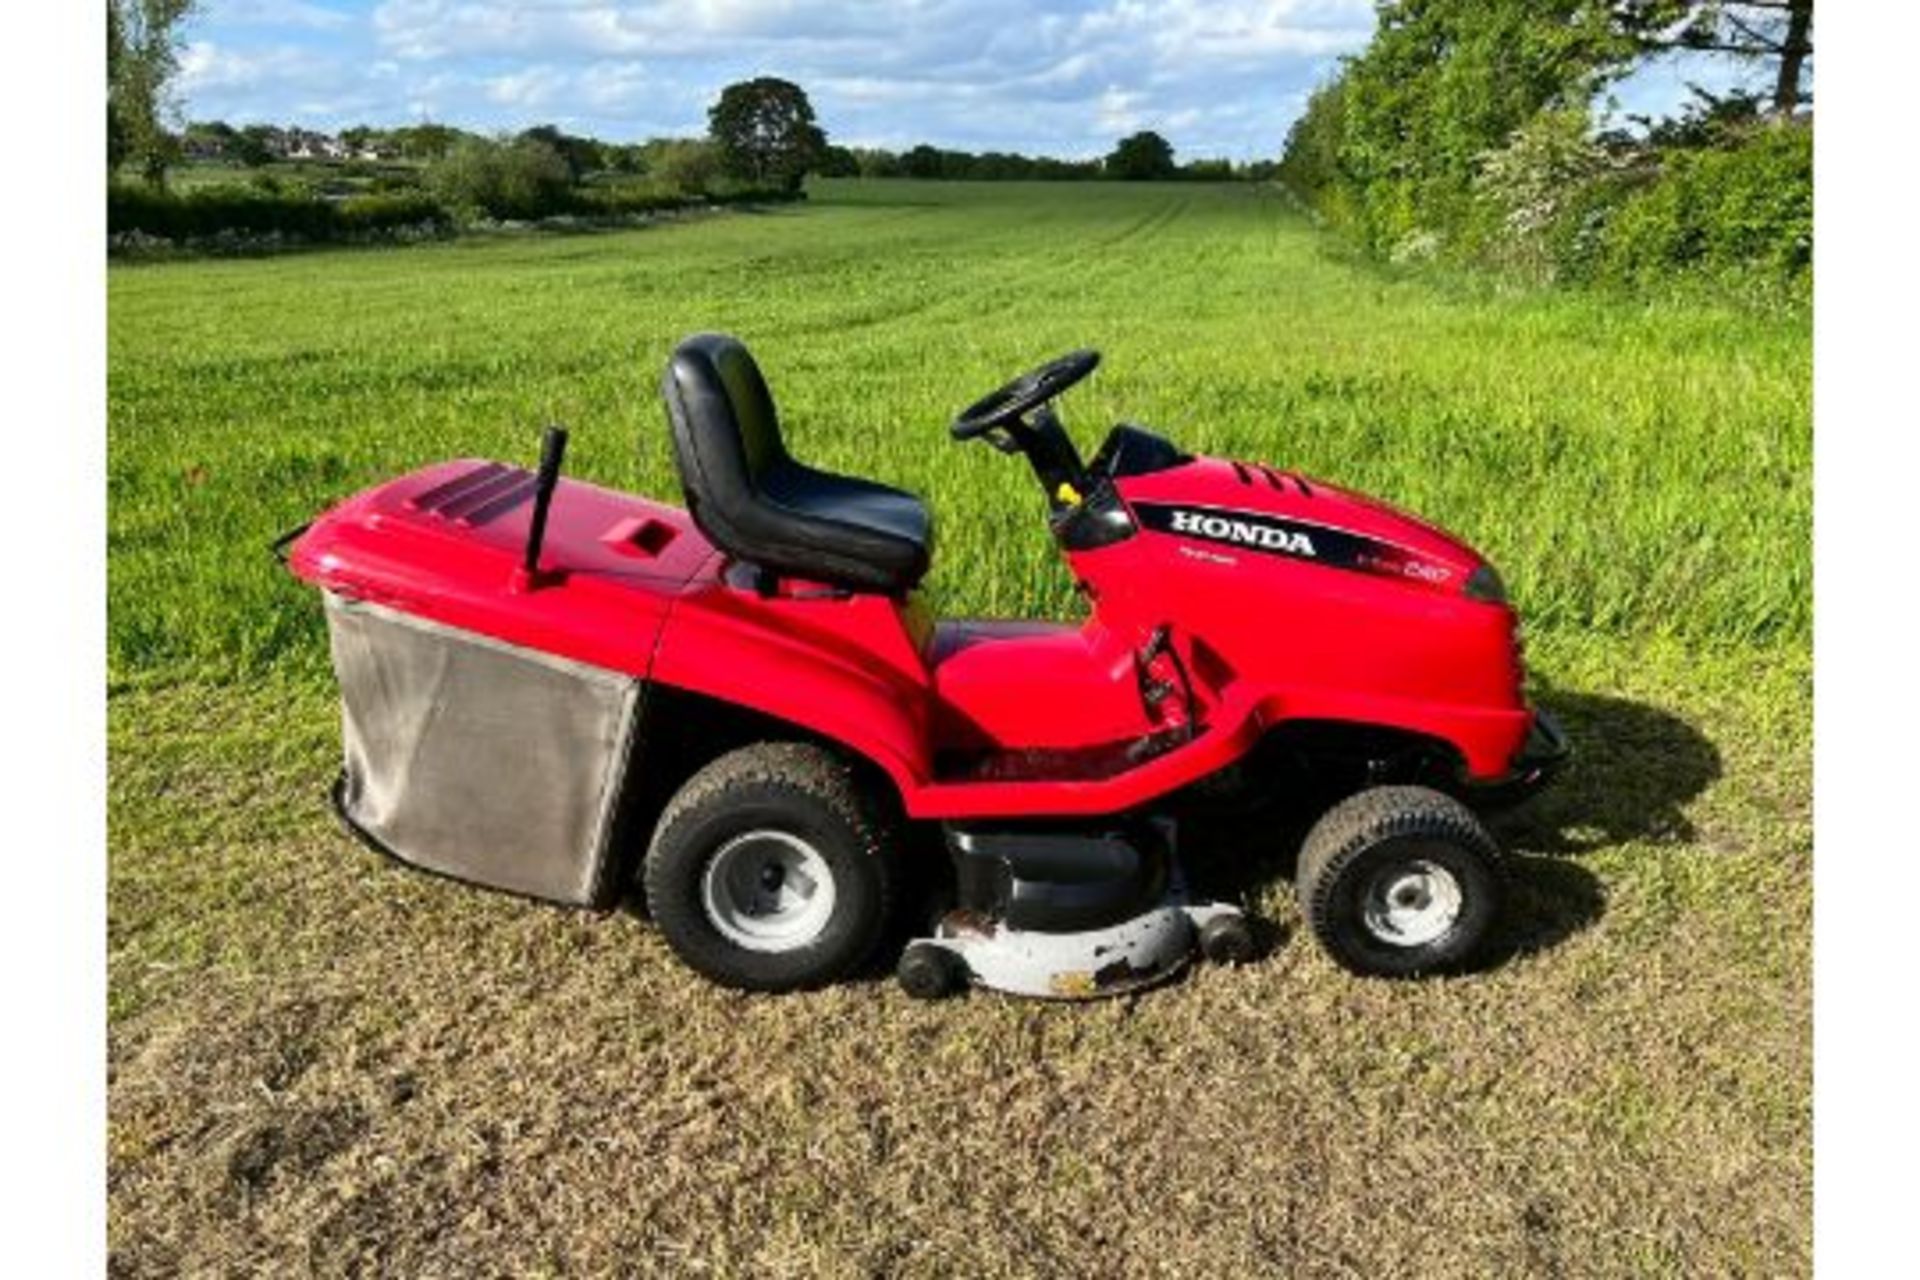 Honda 2417 Ride On Mower With Rear Collector, Runs Drives Cuts And Collects "PLUS VAT" - Image 2 of 22